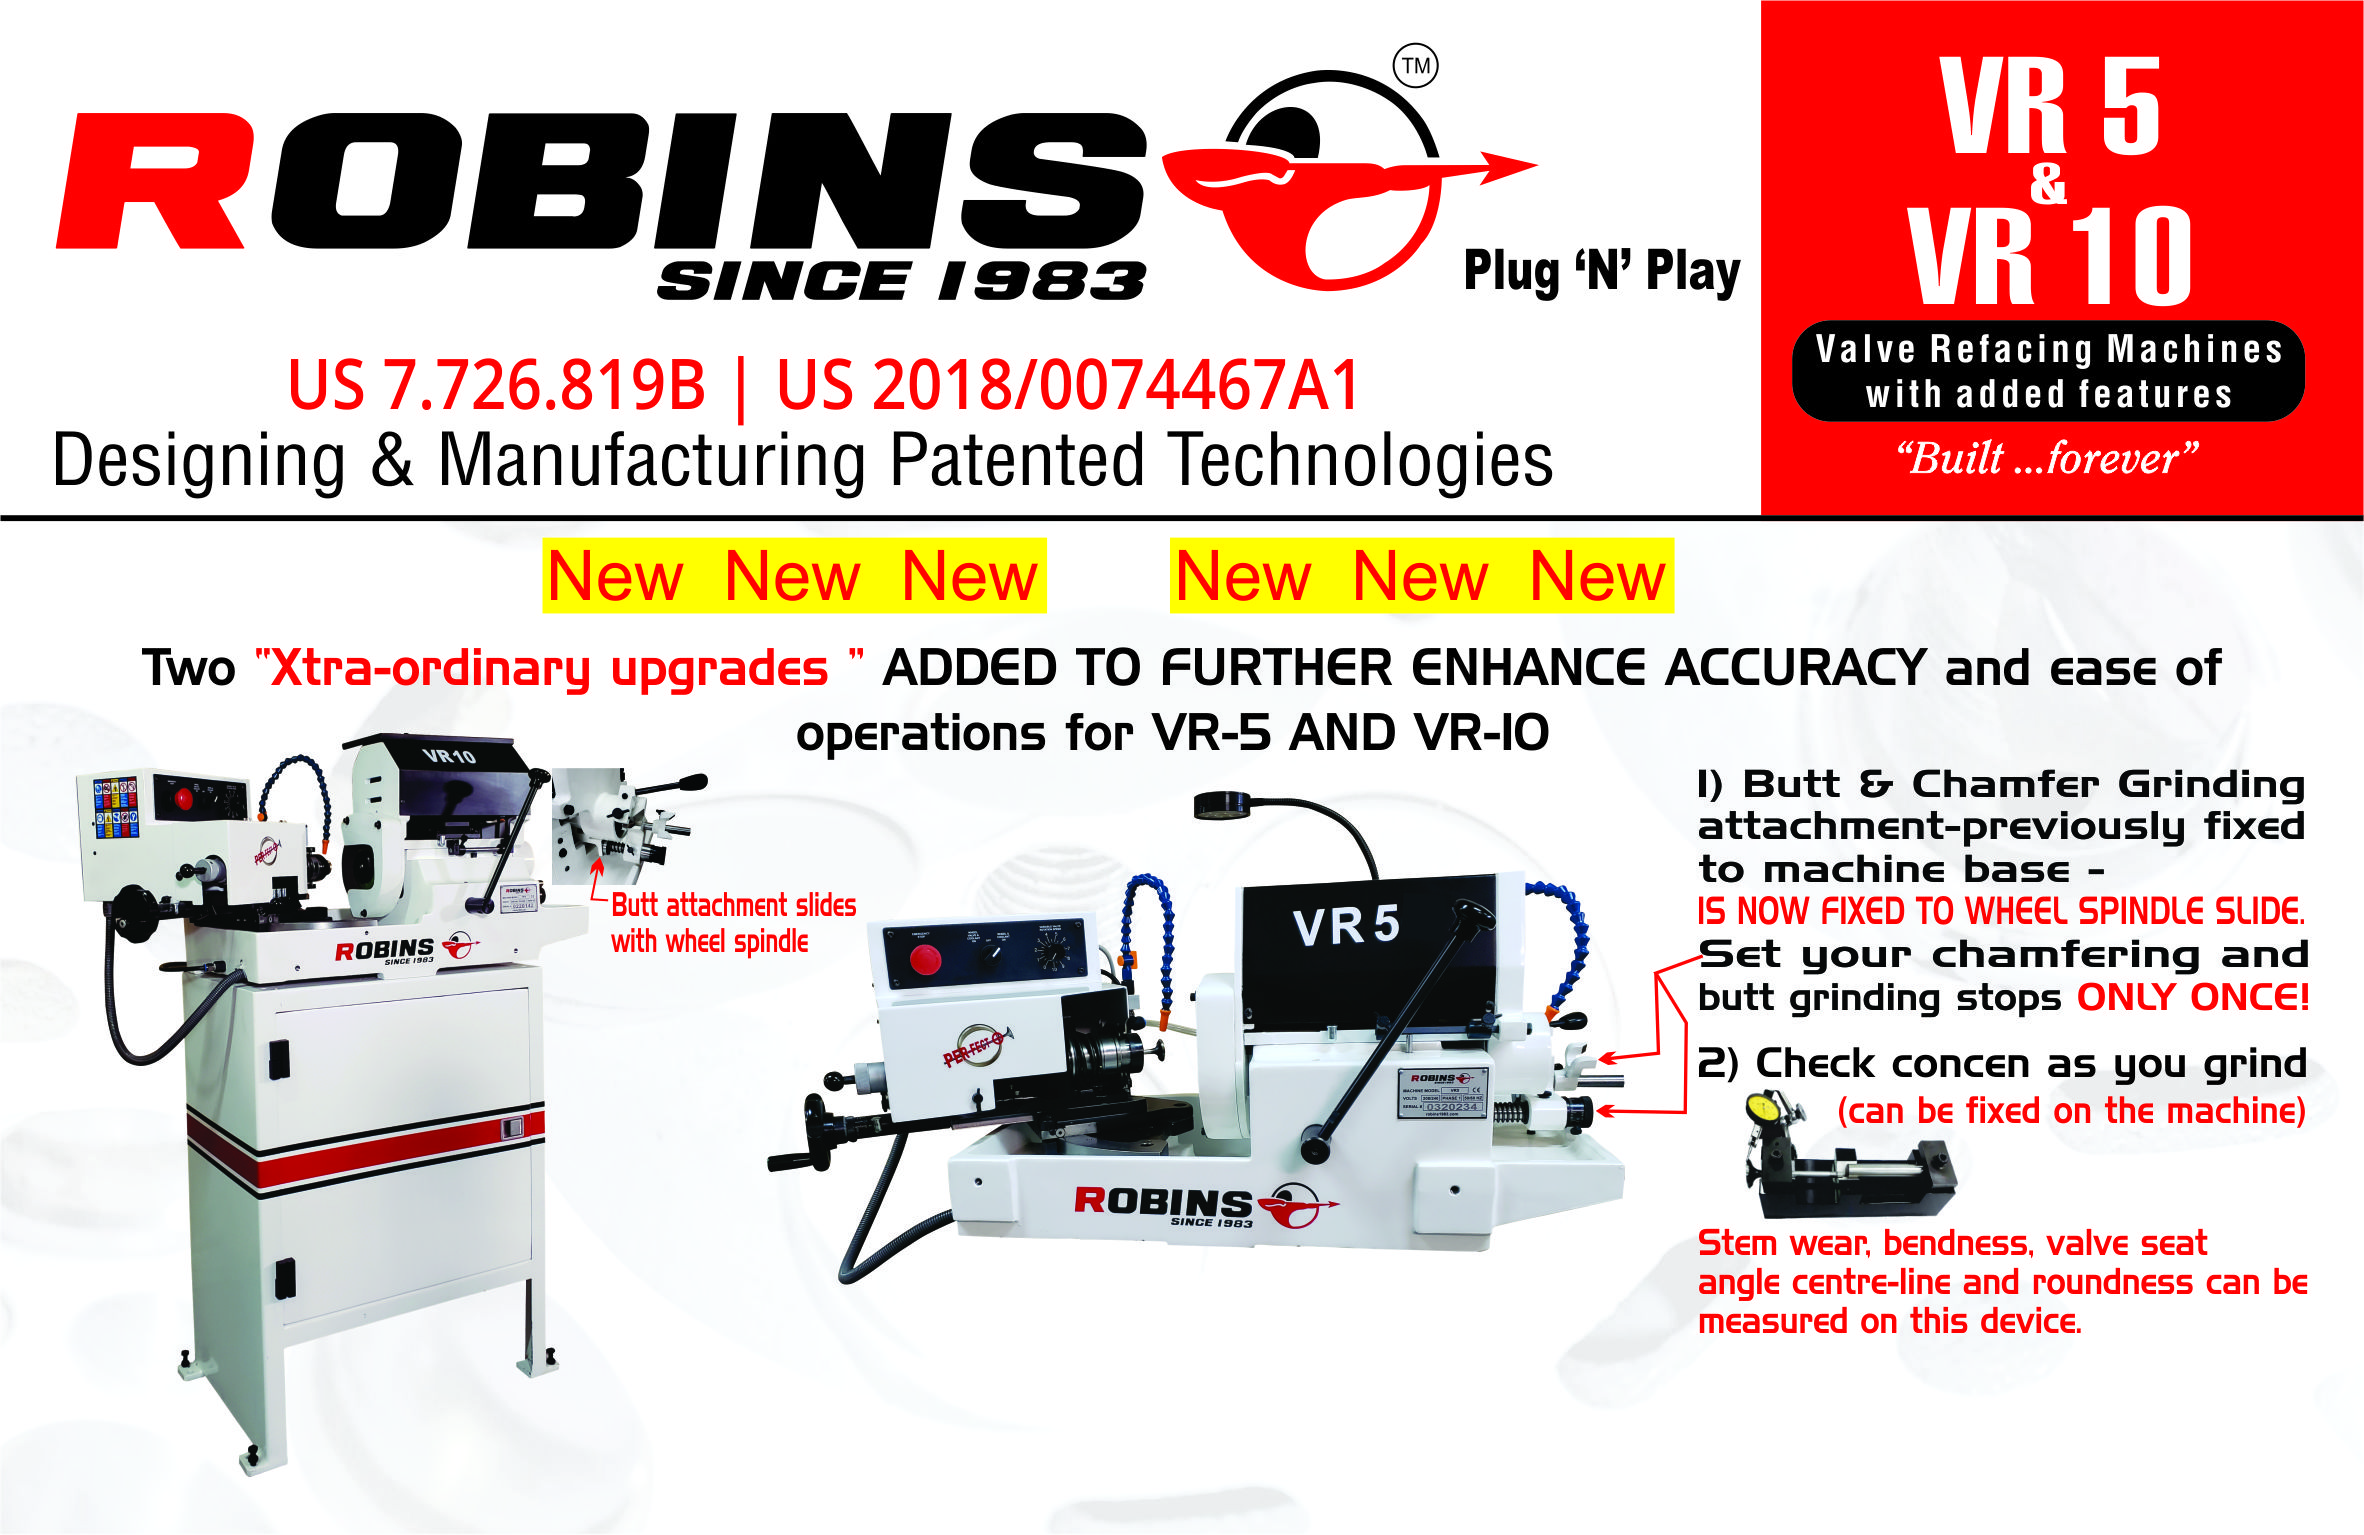 Robins Seat and Guide Machine - World Best Technology  | Robins Machines | seat and guide machine, valve seat and guide machine, SG8 seat and guide machine,,SG7 seat and guide machine,seat guide machine,seat guide machine models  - GL97954